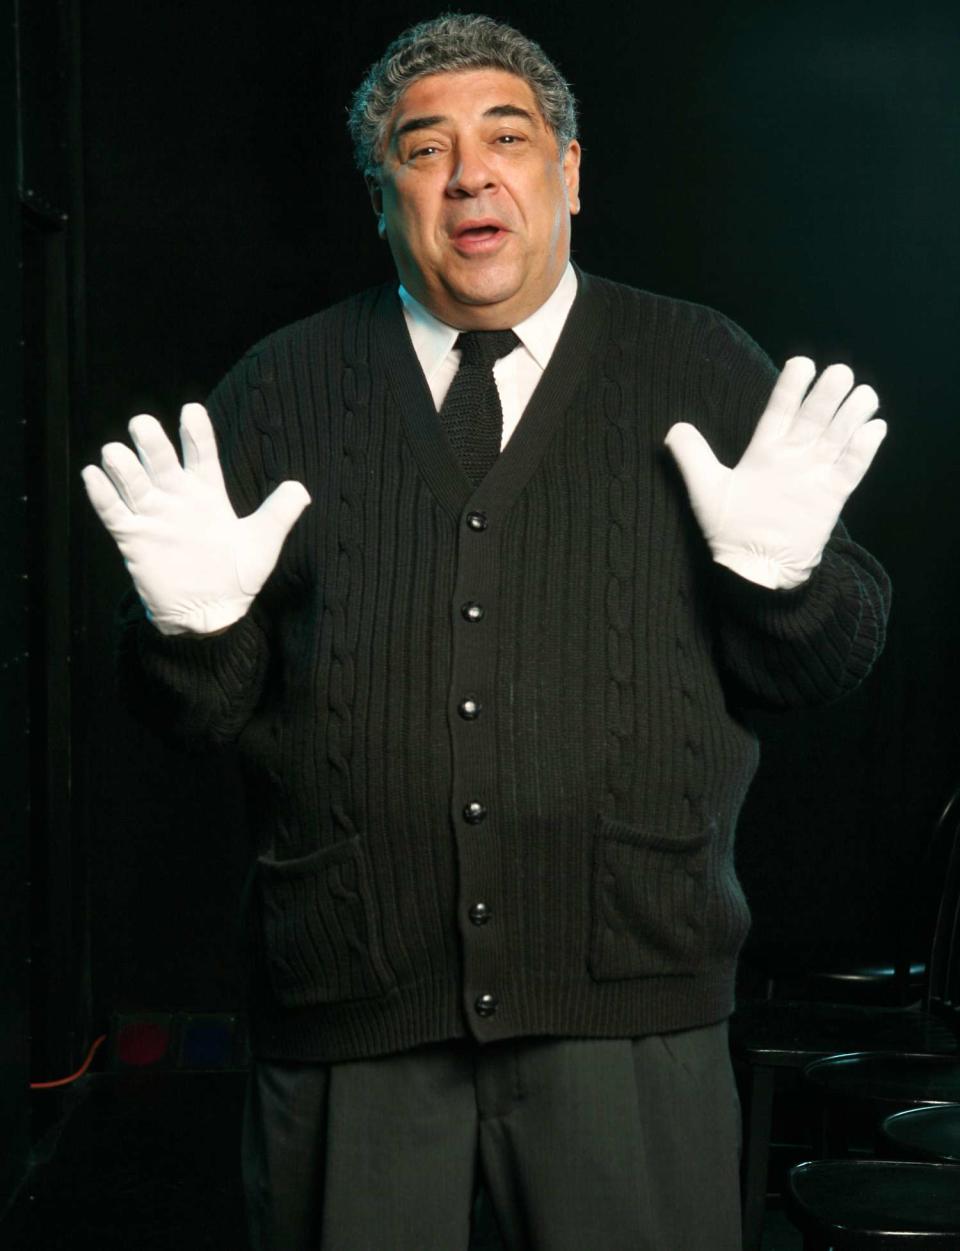 <p>Just over the bridge from New Jersey, where Vincent Pastore found fame as a star on <em>The Sopranos</em>, the actor played Amos Hart in <em>Chicago</em>, joining the cast alongside his costar Aida Turturro in 2007. </p>